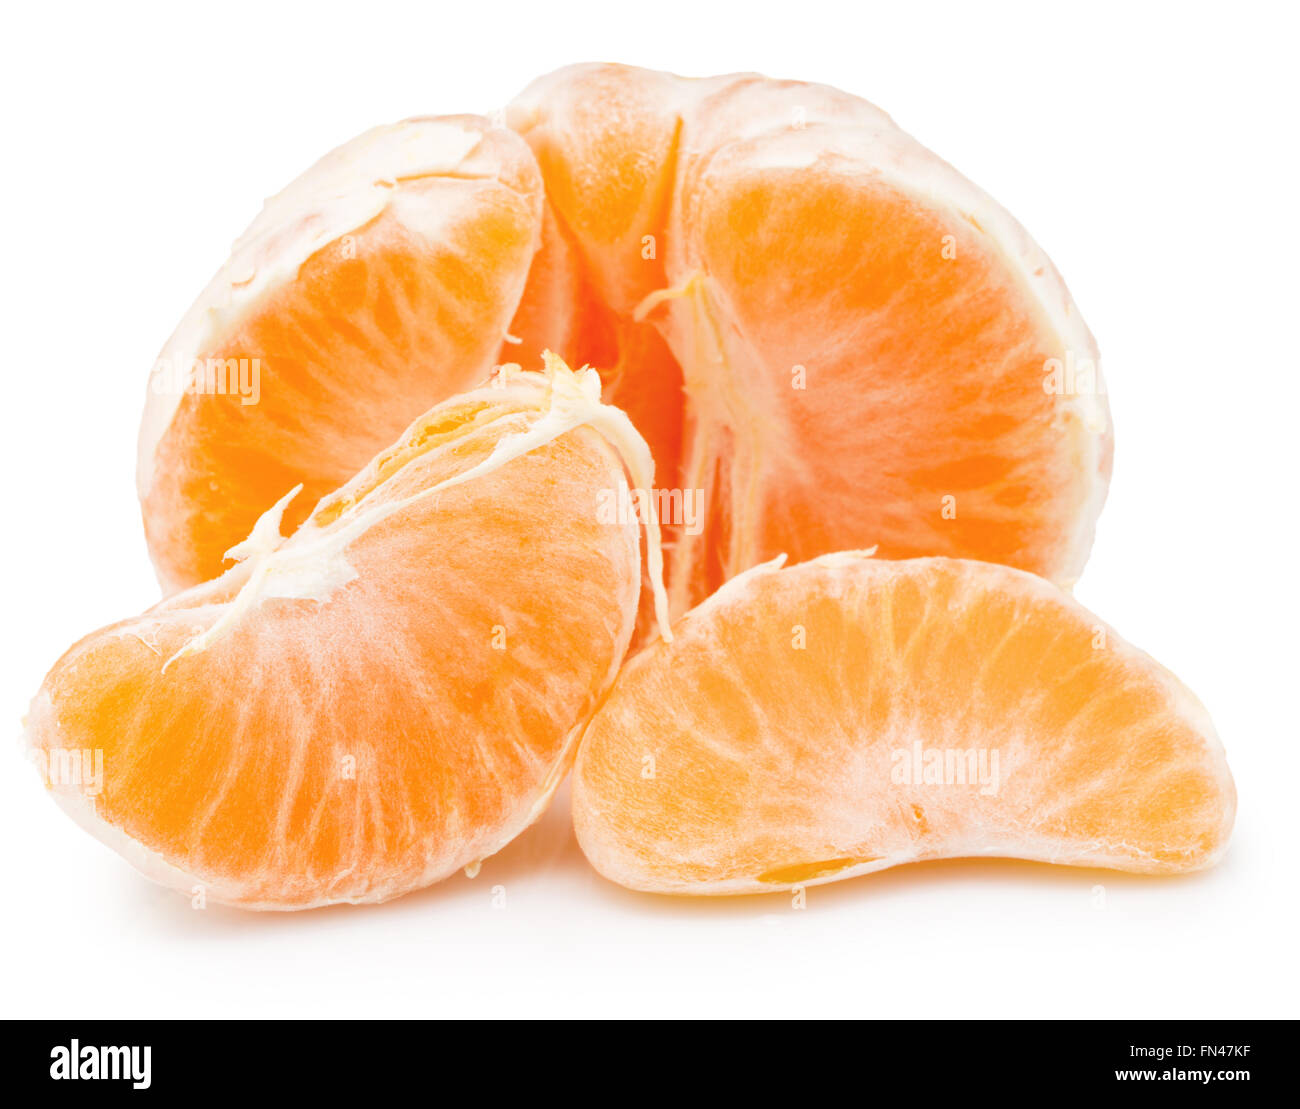 tangerine slices isolated on the white background. Stock Photo